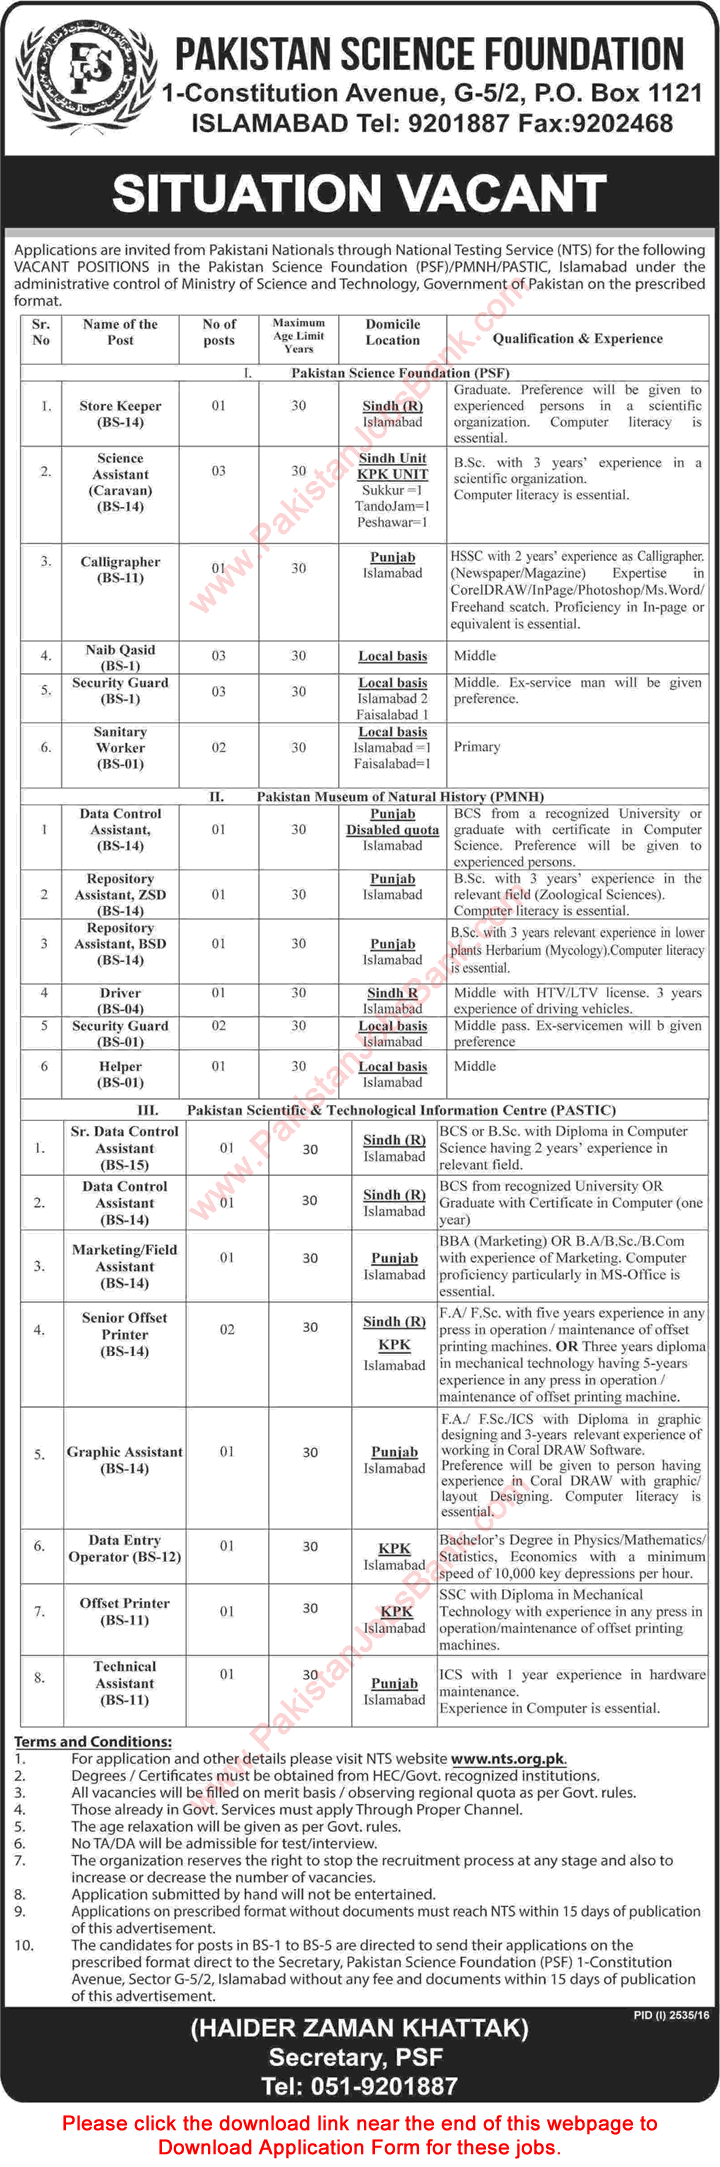 Pakistan Science Foundation Jobs November 2016 NTS Application Form PSF / PMNH / PASTIC Latest